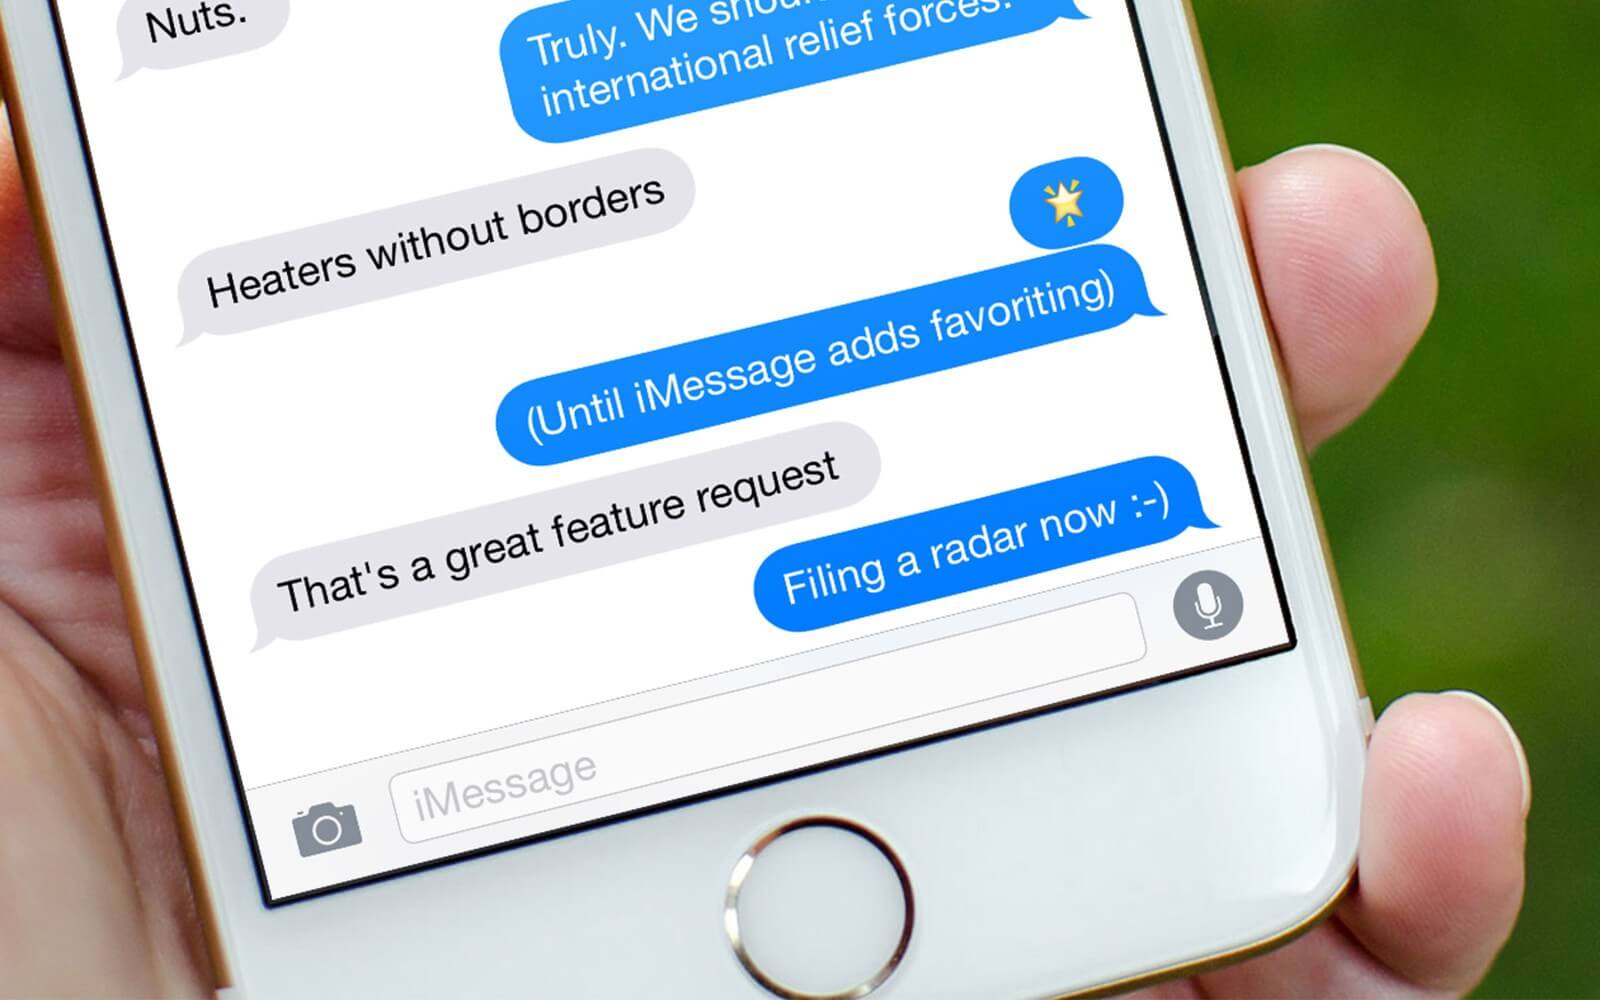 EU won't force Apple to 'open up' iMessage to other platforms